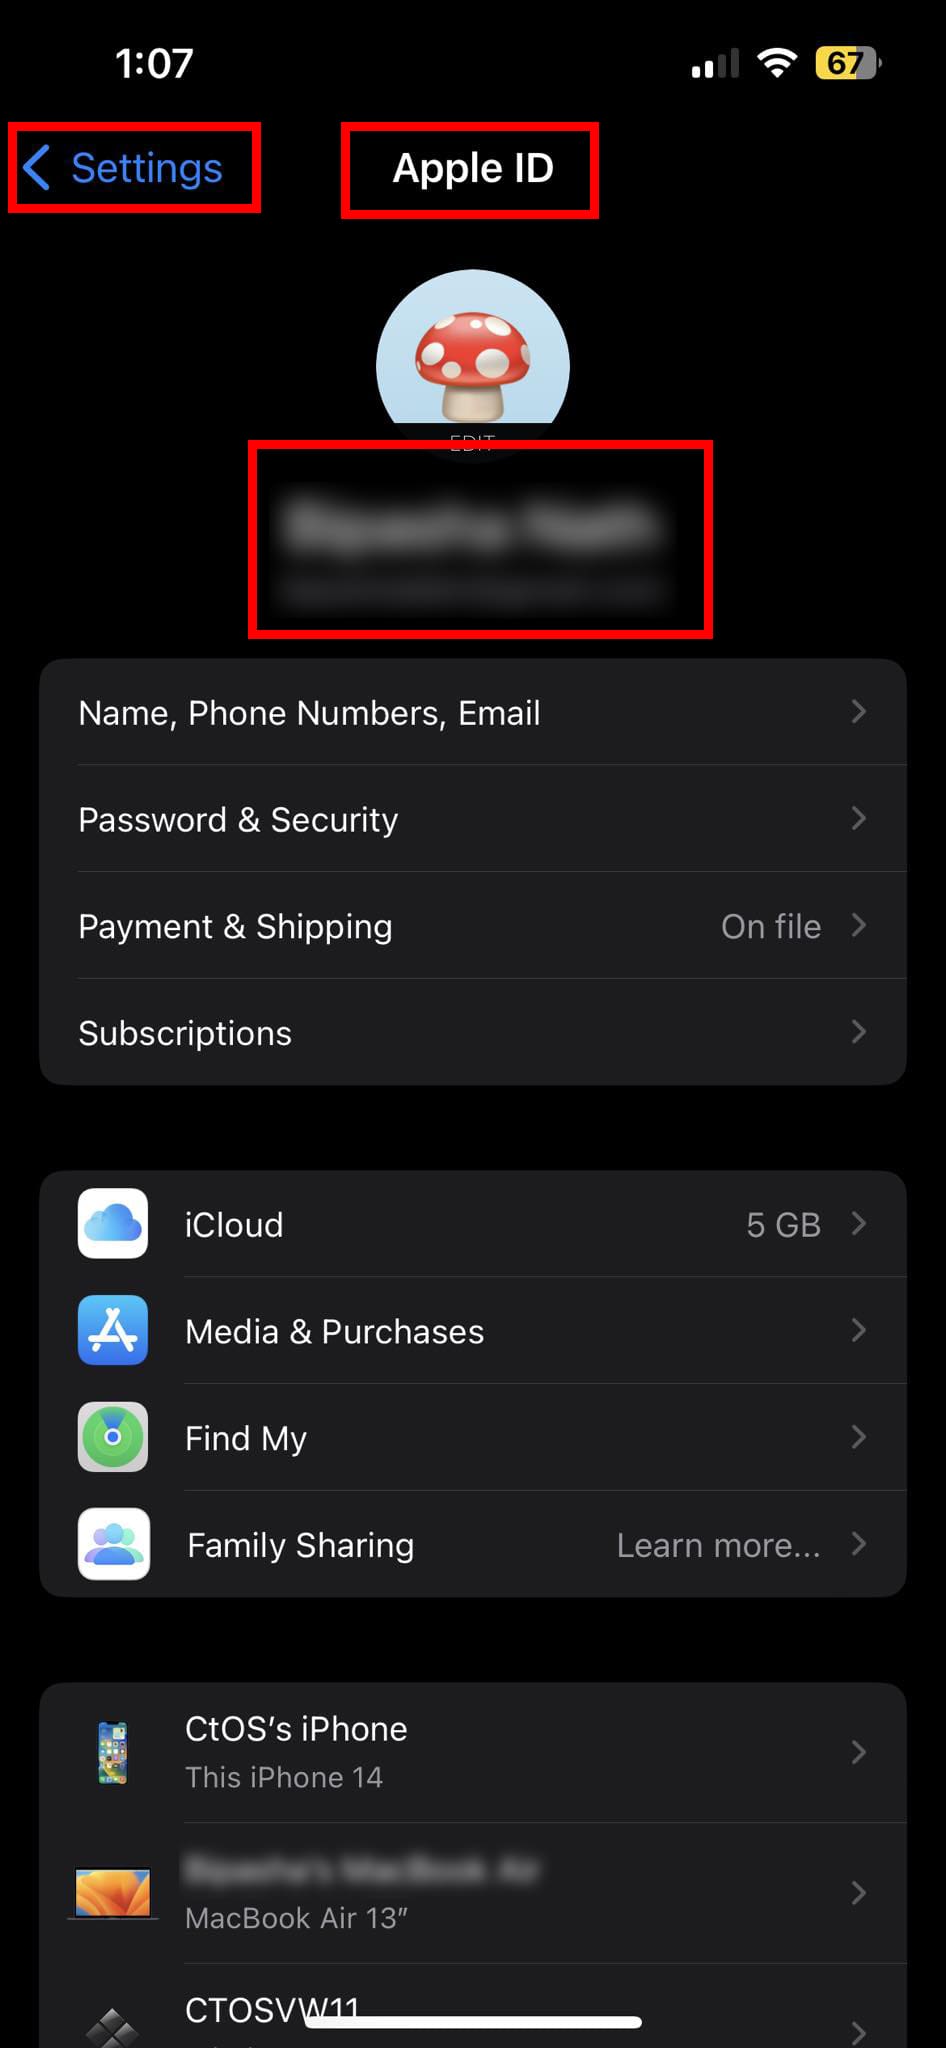 How to locate Apple ID on iPhone